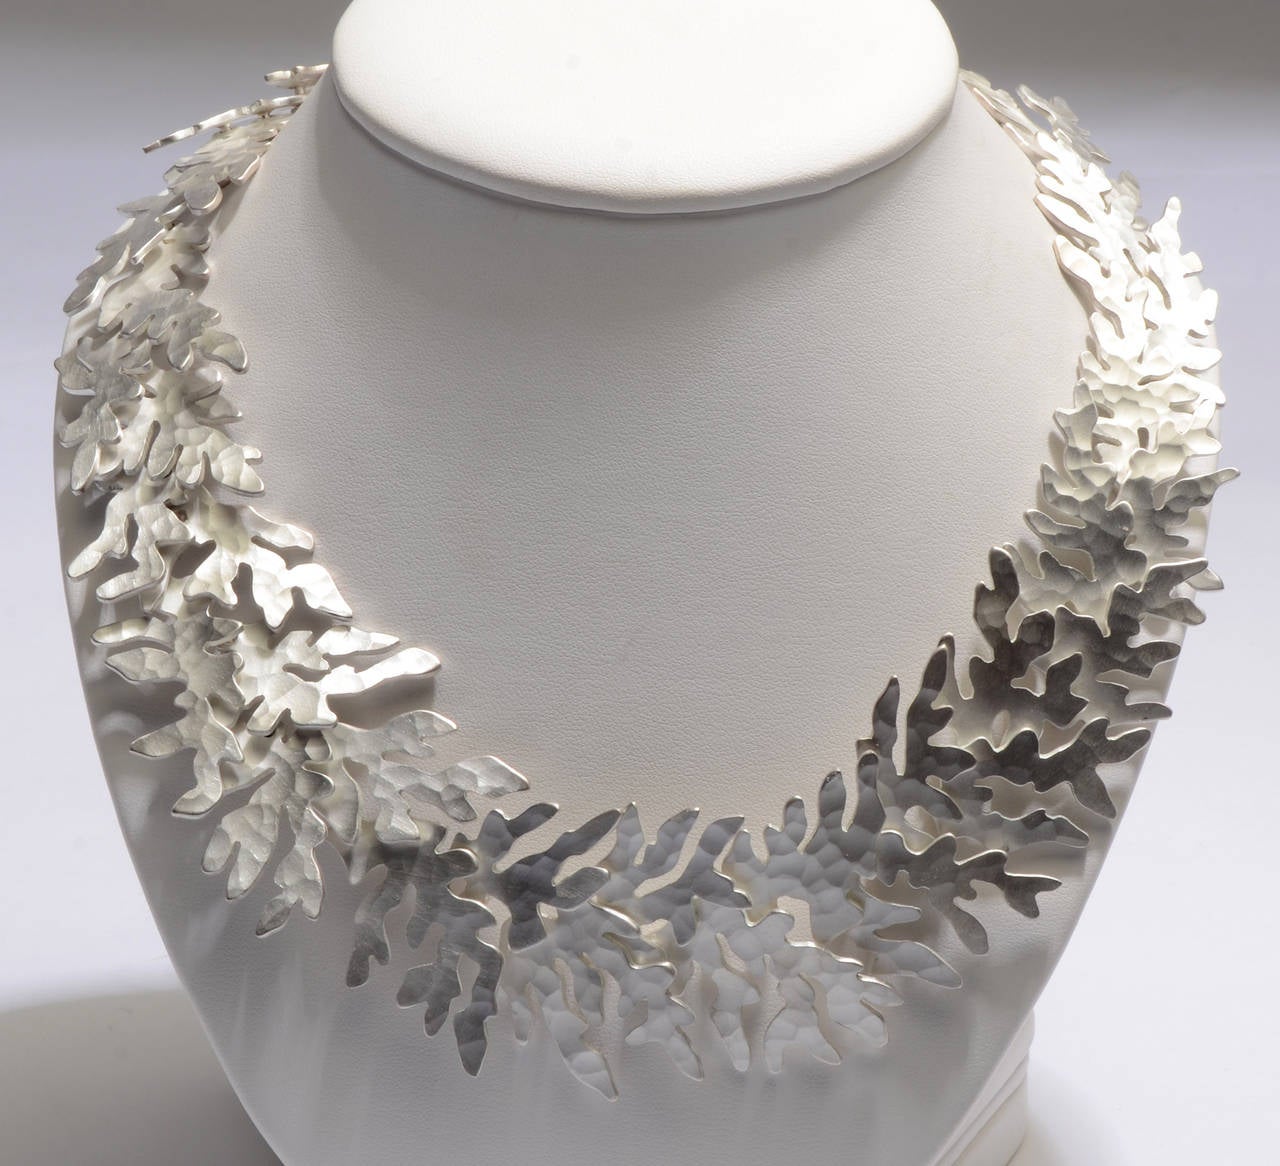 This wonderful 950 silver (higher quality than sterling) necklace by Eduardo Herrera calls two mind two very different images. It looks like coral as well as the cut out designs of Henri Matisse.
The links are hammered. They are 1 1/2